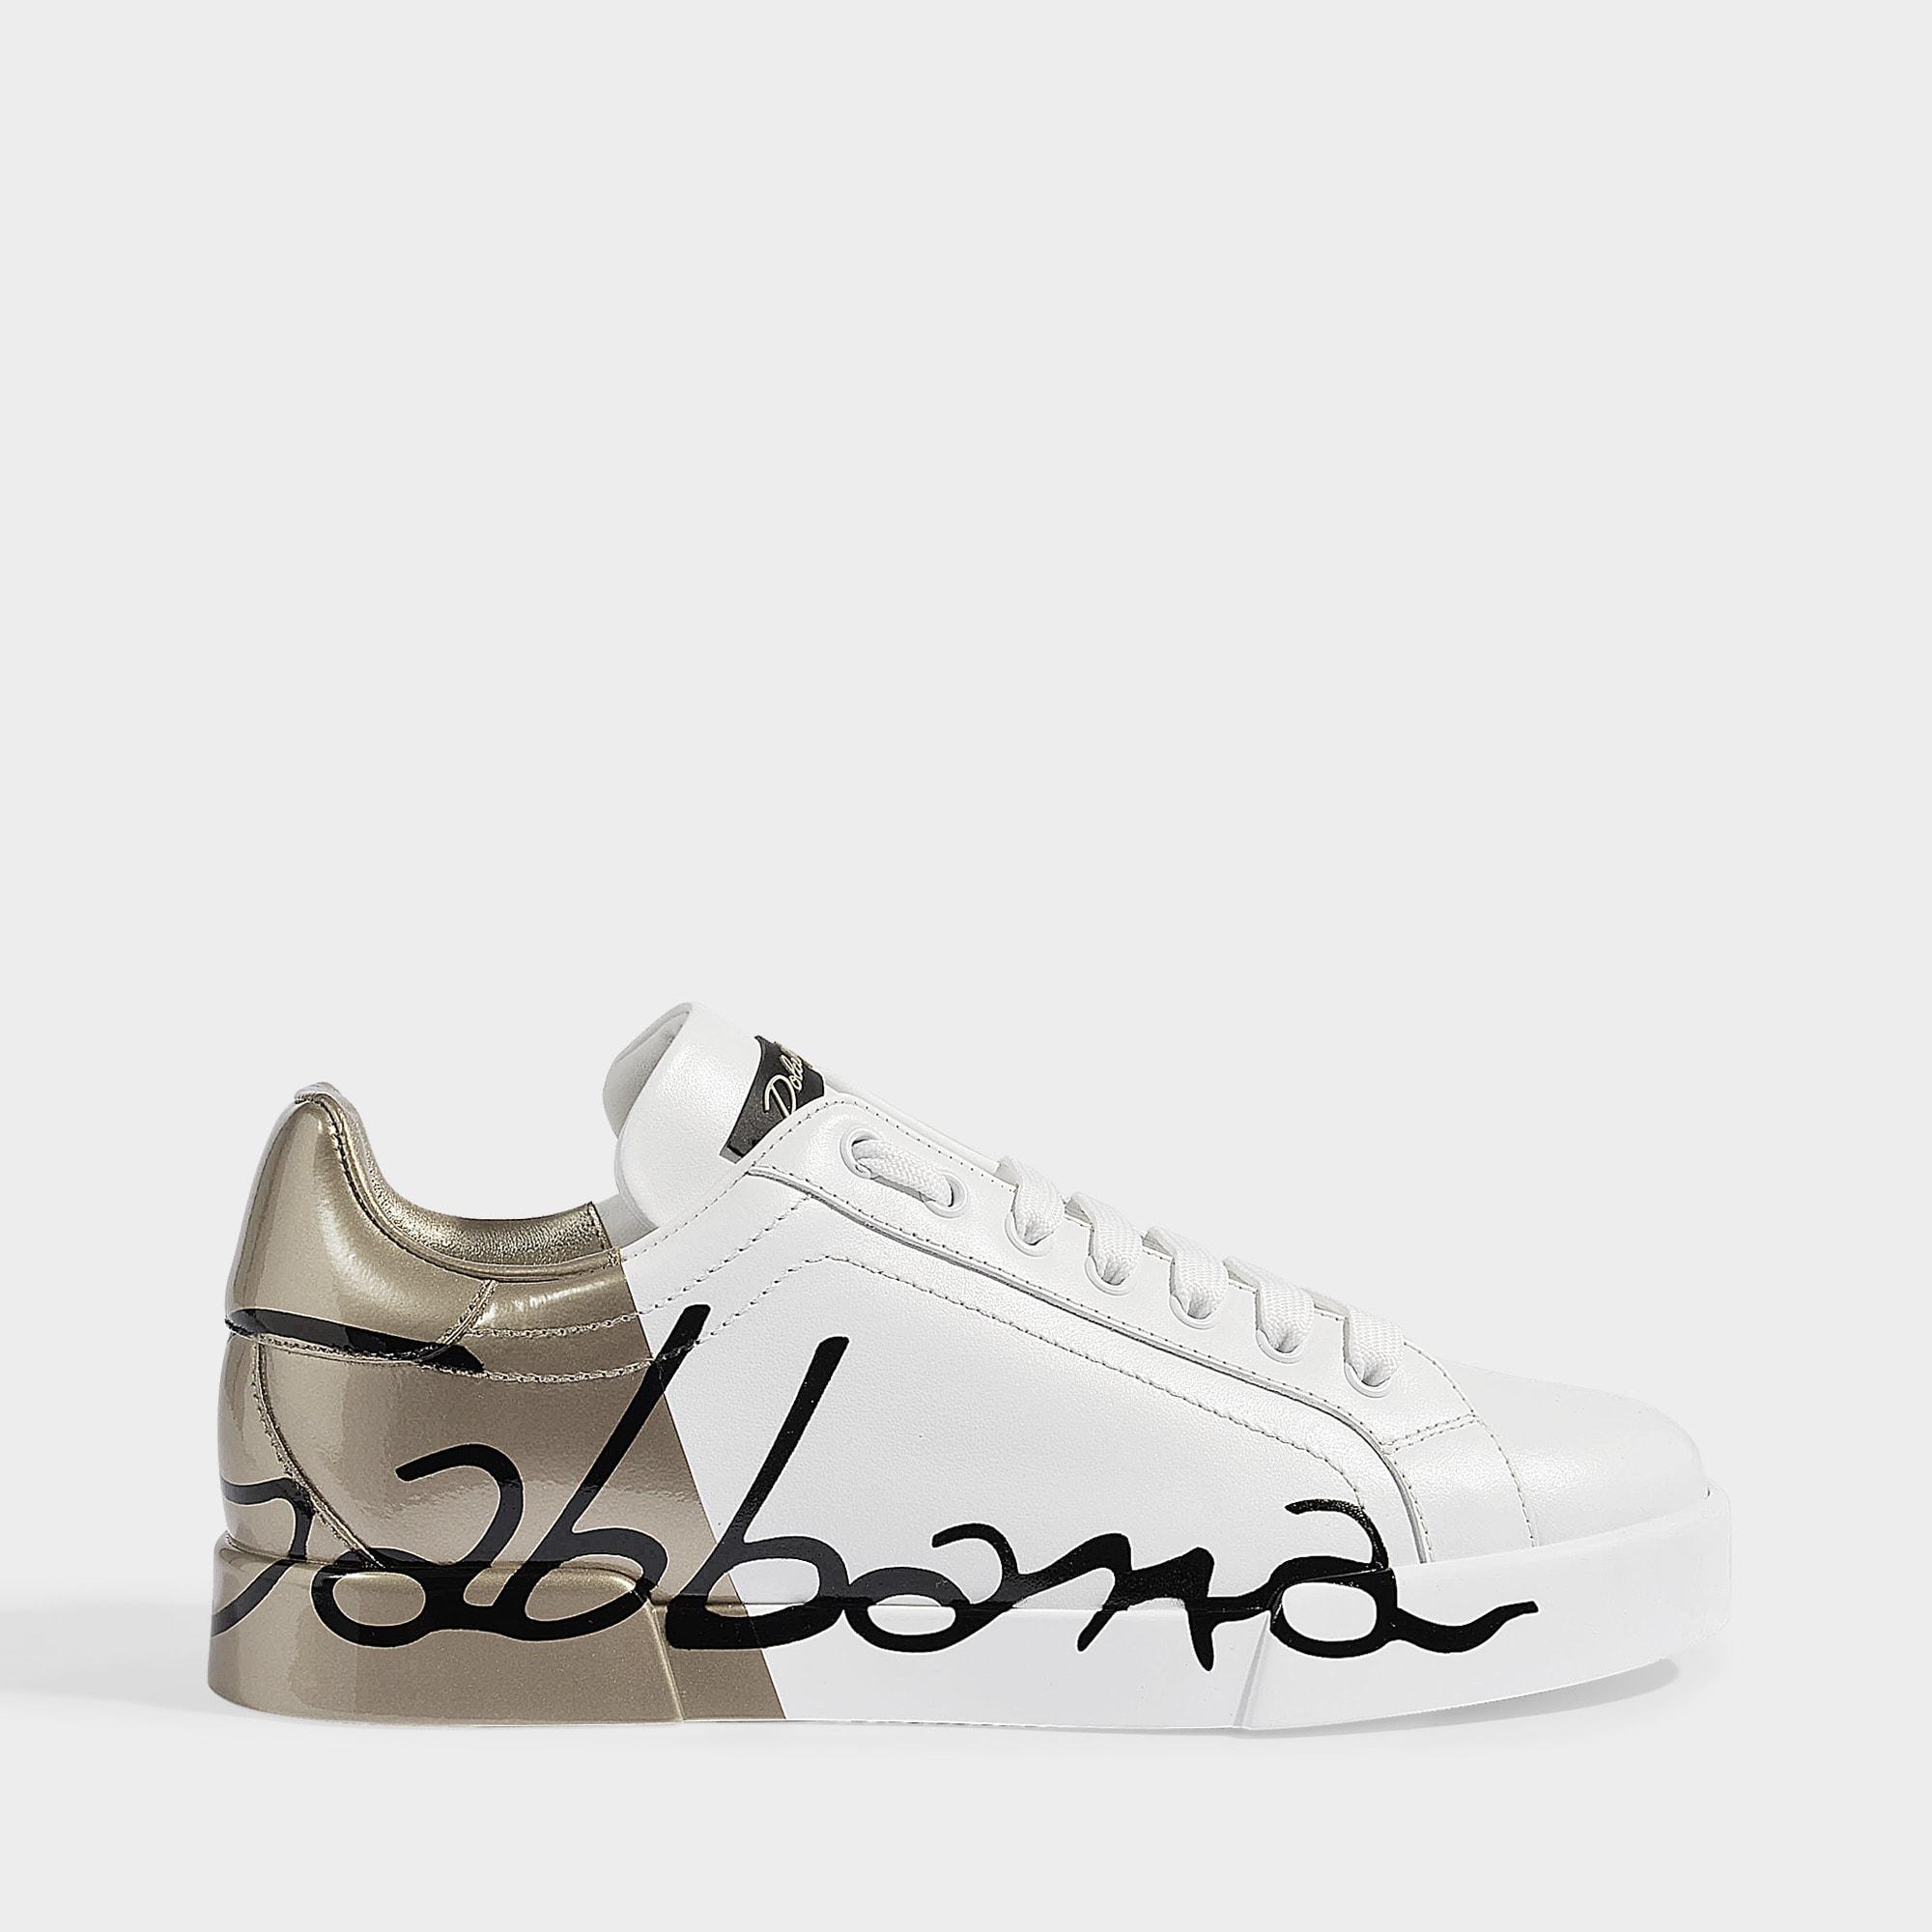 Dolce & Gabbana Leather Gold Logo Printed Sneakers in White - Lyst